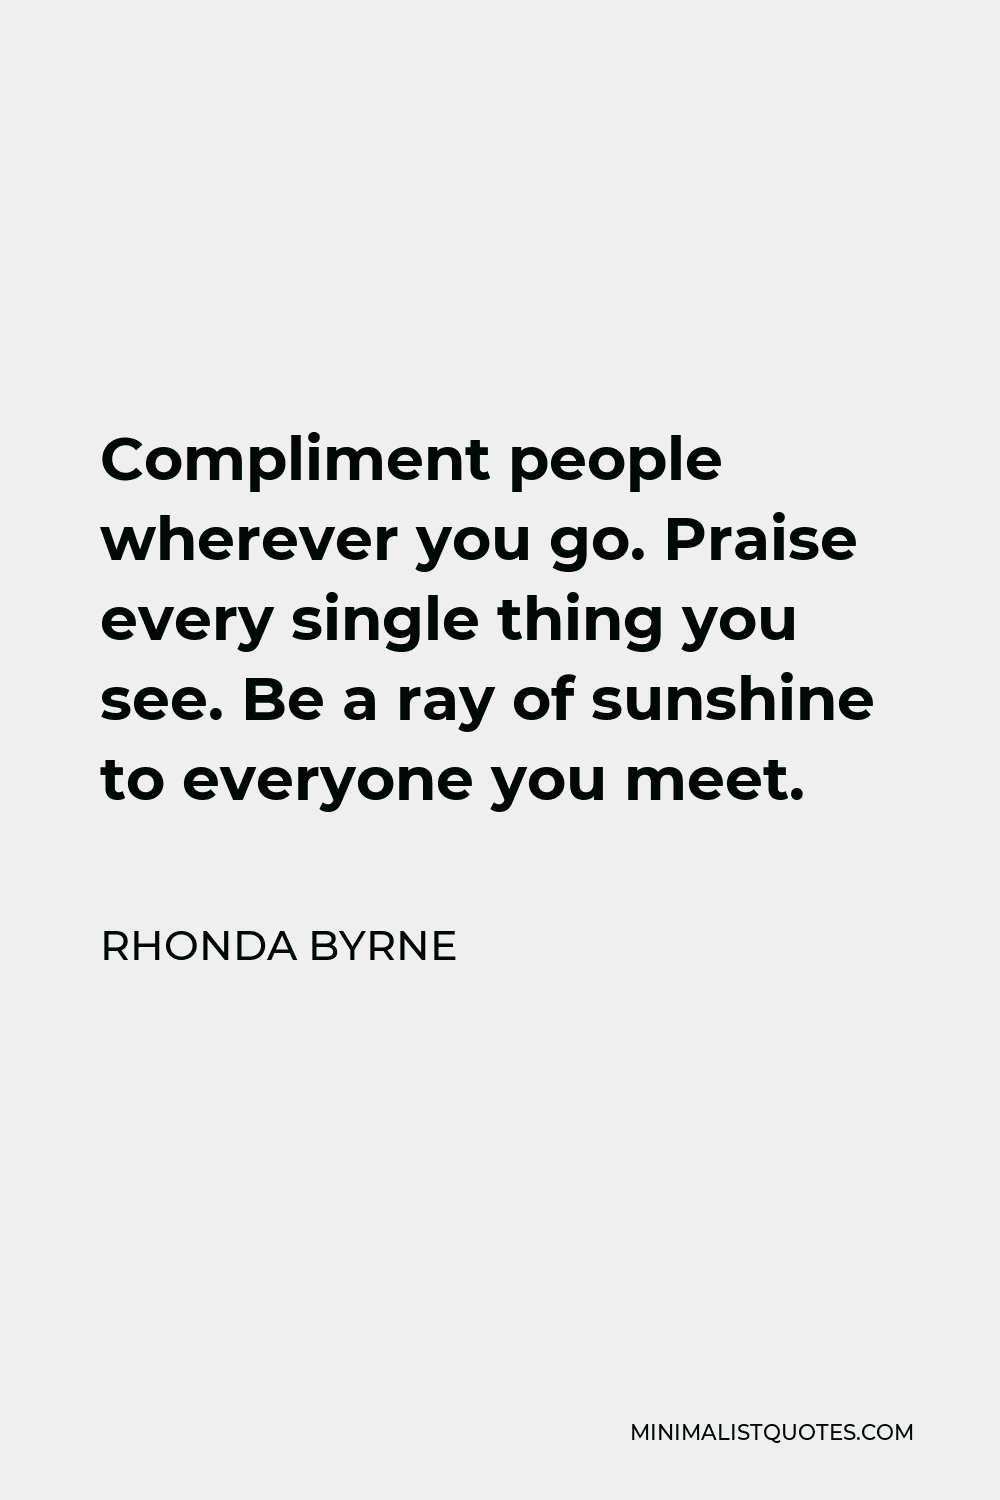 Rhonda Byrne Quote - Compliment people wherever you go. Praise every single thing you see. Be a ray of sunshine to everyone you meet.